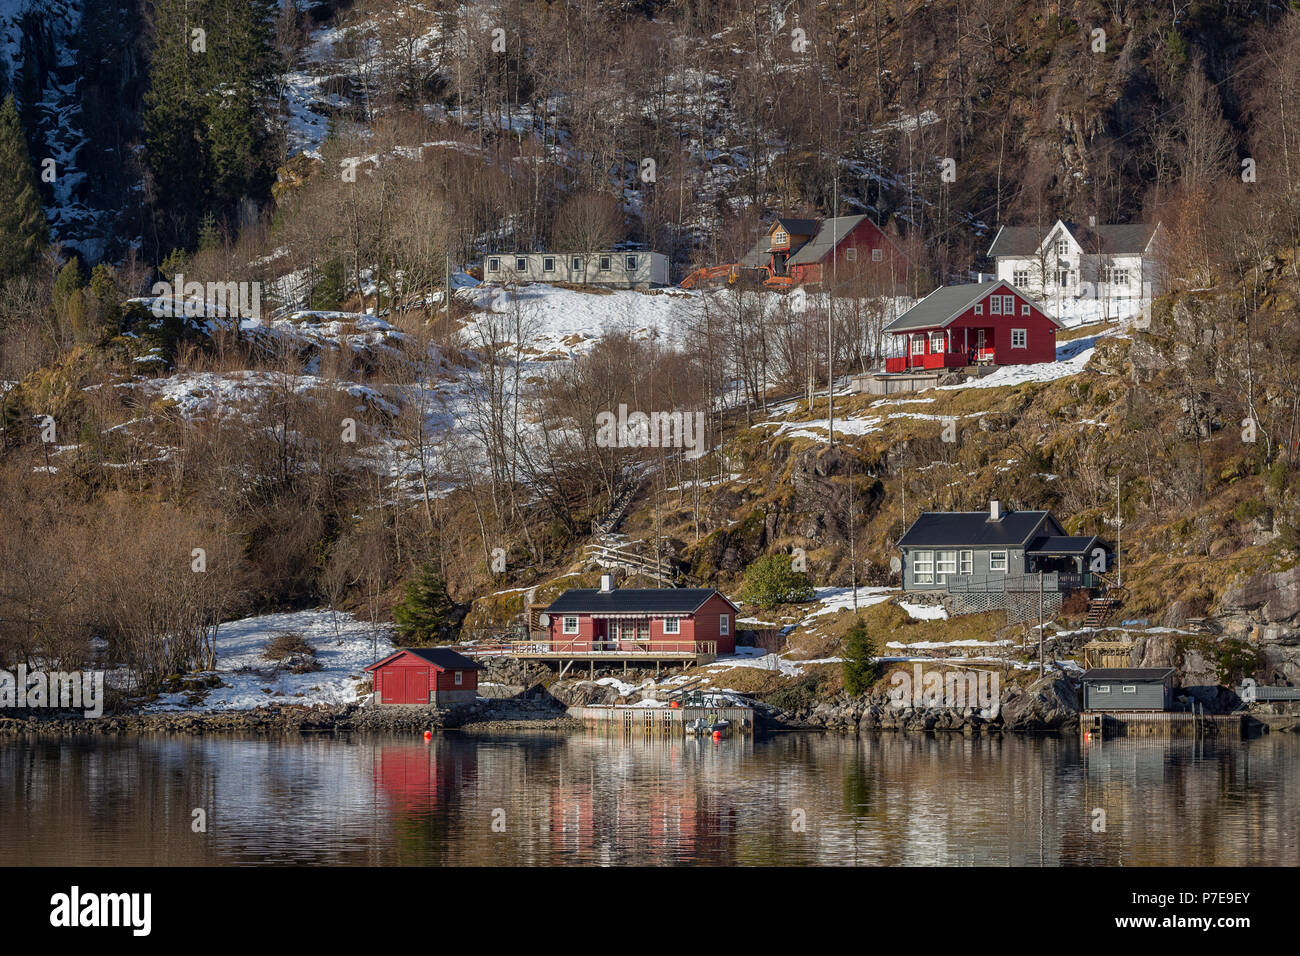 Village built on the shoreline of Osterfjorden, Norway. Taken from the Bergen to Mostraumen cruise. Stock Photo